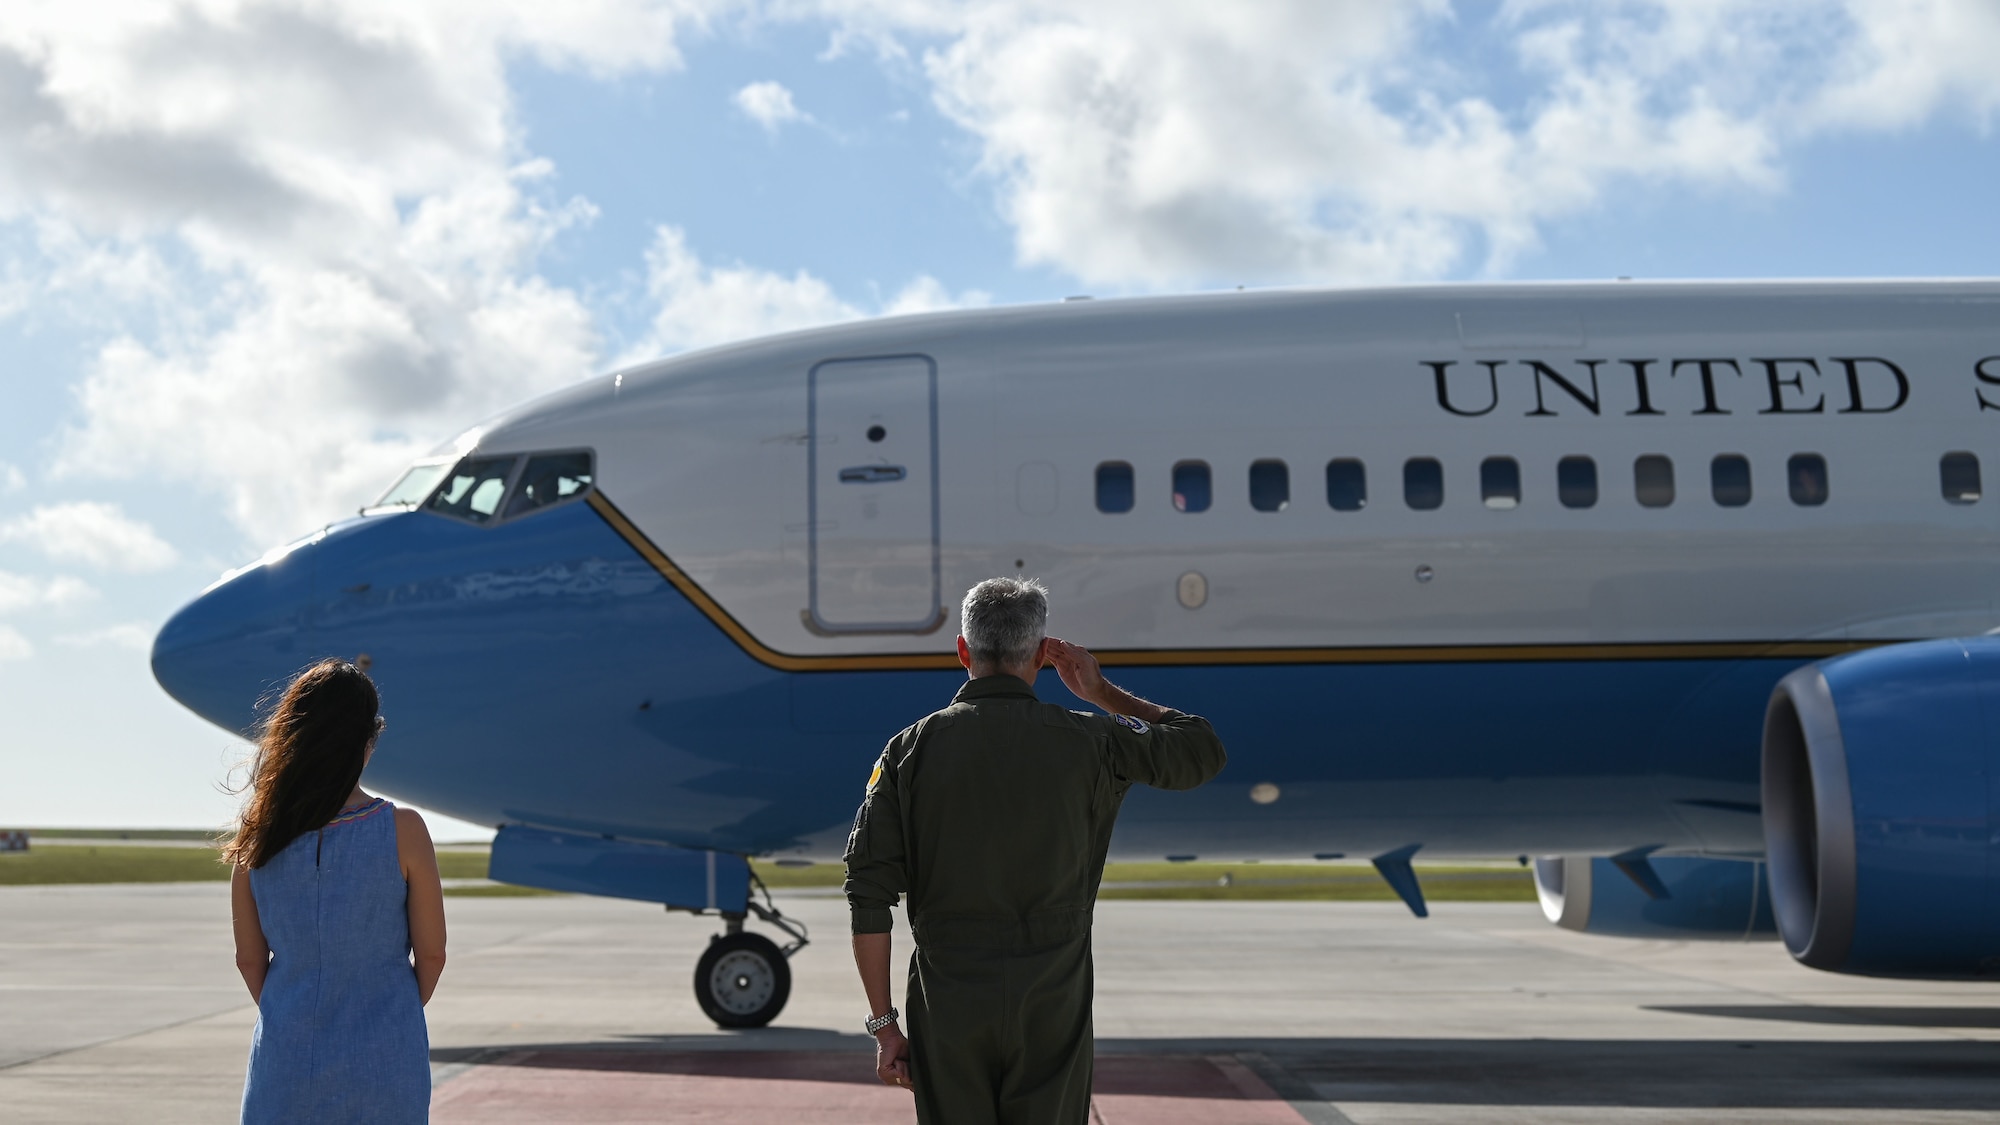 U.S. Air Force Brig. Gen. Jeremy Sloane, commander of the 36th Wing, salutes as U.S. Space Force Gen. John W. “Jay” Raymond, Chief of Space Operations, arrives at Andersen Air Force Base, Guam, March 25, 2022. During his visit, Raymond met with Sloane, received a mission brief, toured the 21st Space Operations Squadron, Detachment 2, and met with Airmen and Guardians stationed at Andersen AFB. (U.S. Air Force photo by Staff Sgt. Aubree Owens)